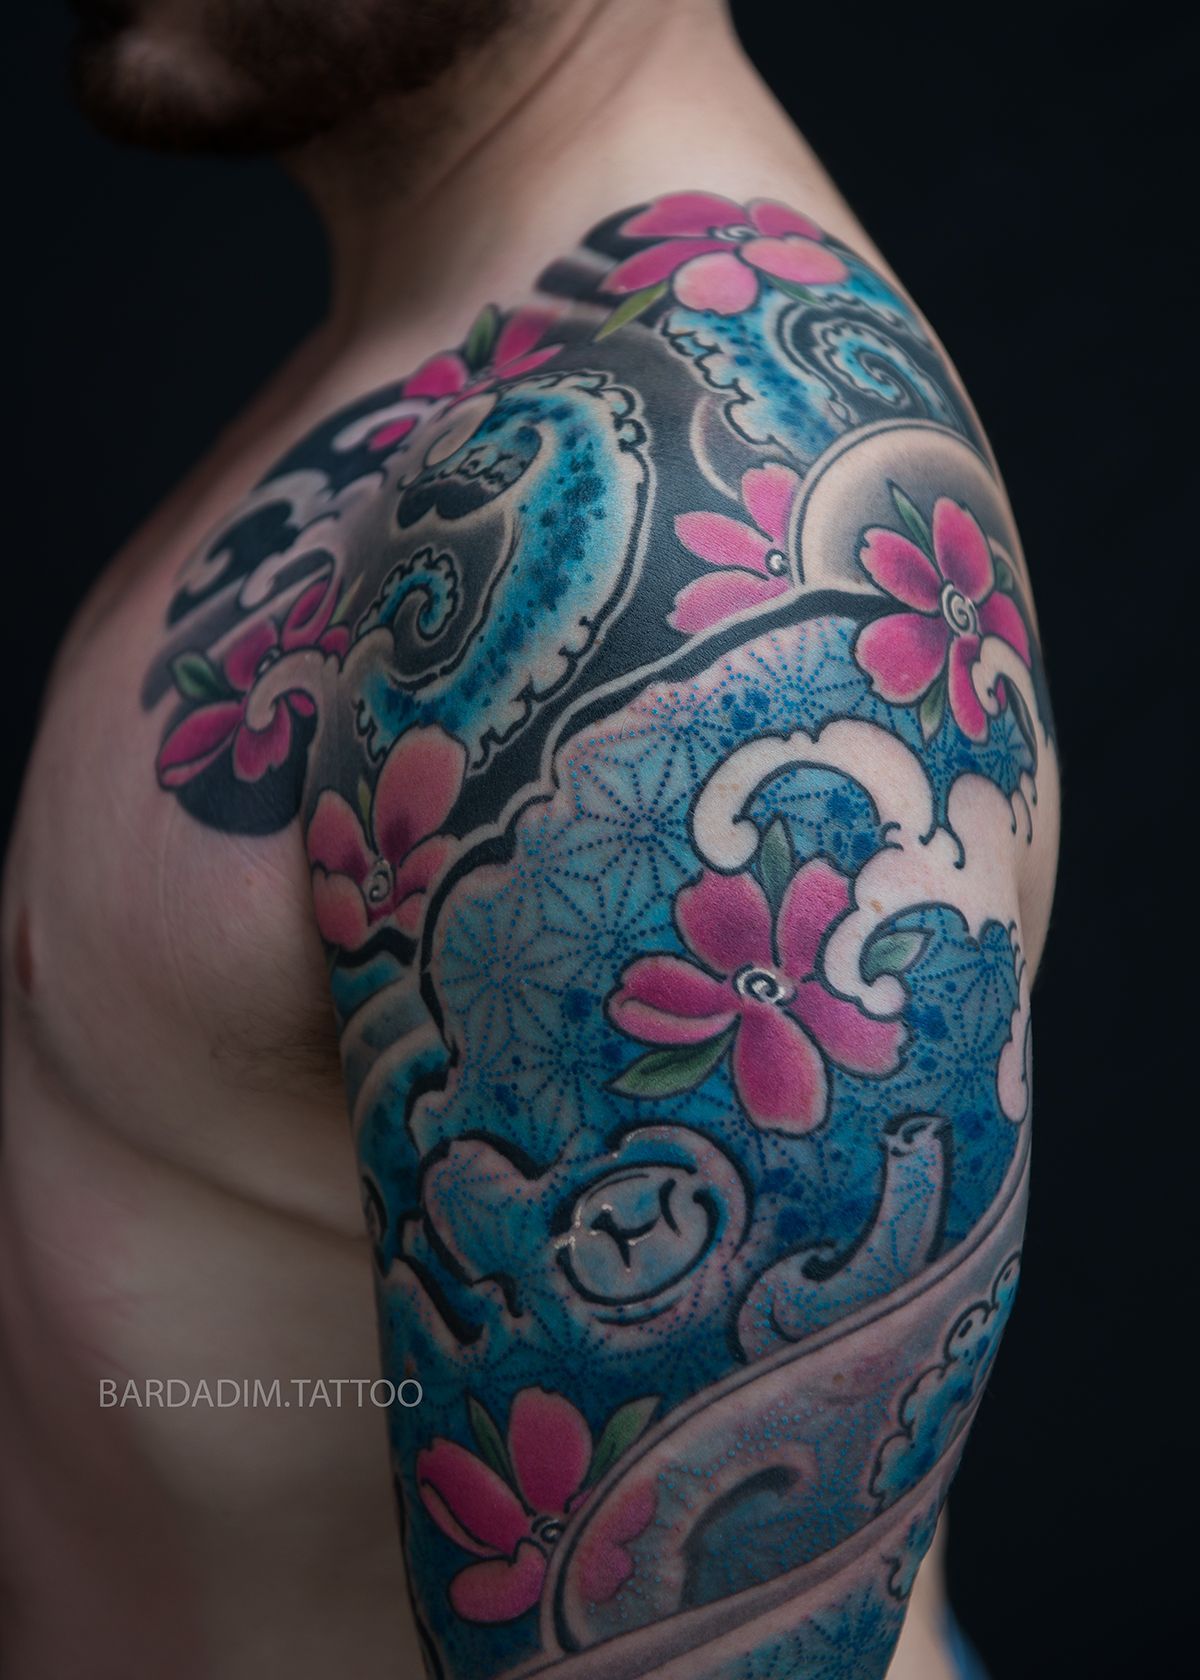 Blue octopus and cherry blossoms tattoo sleeve